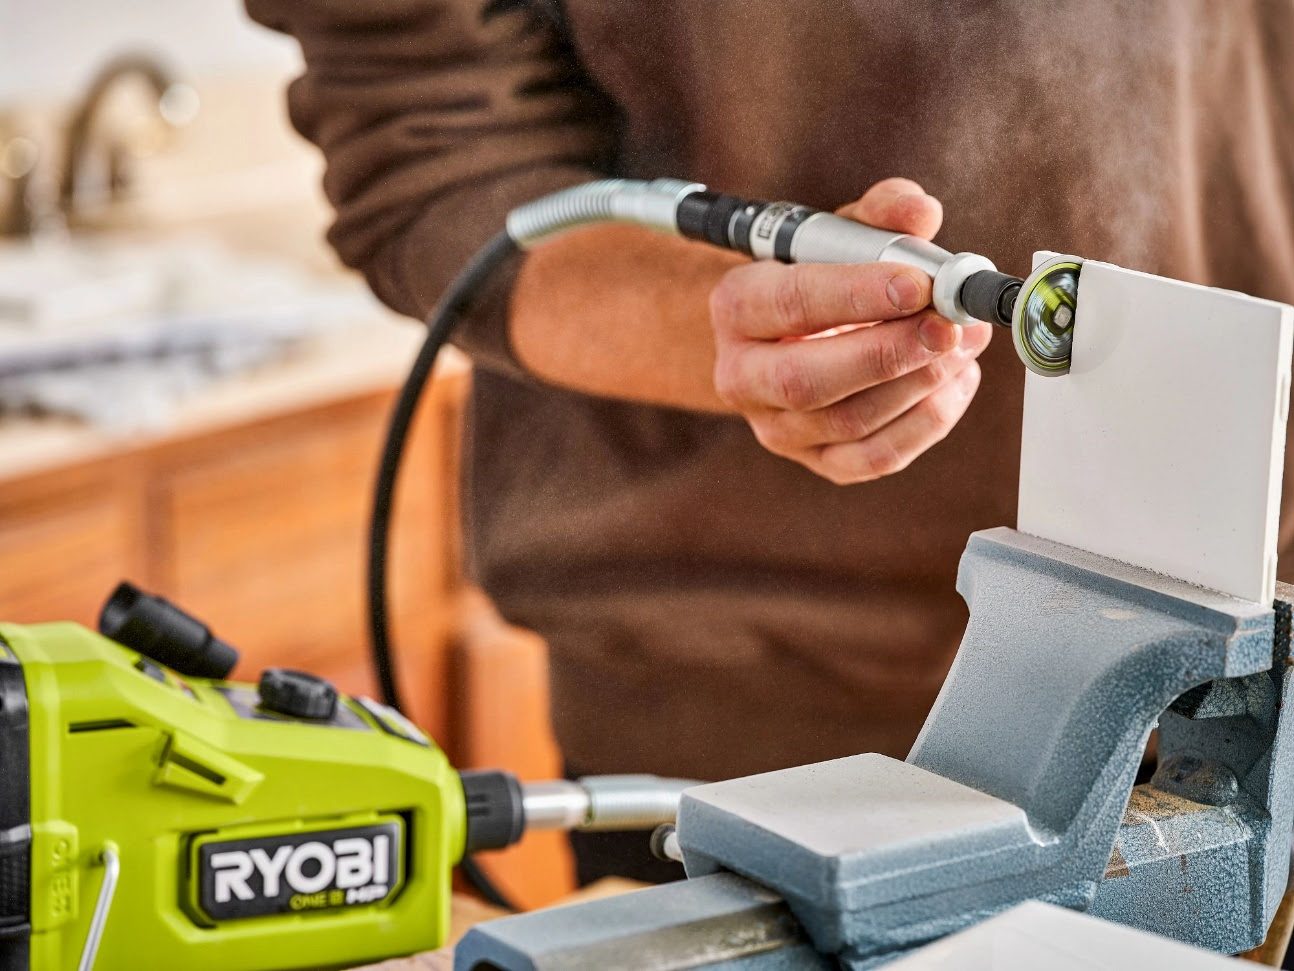 RYOBI introduces over 60 new hobby craft & maker accessory solutions